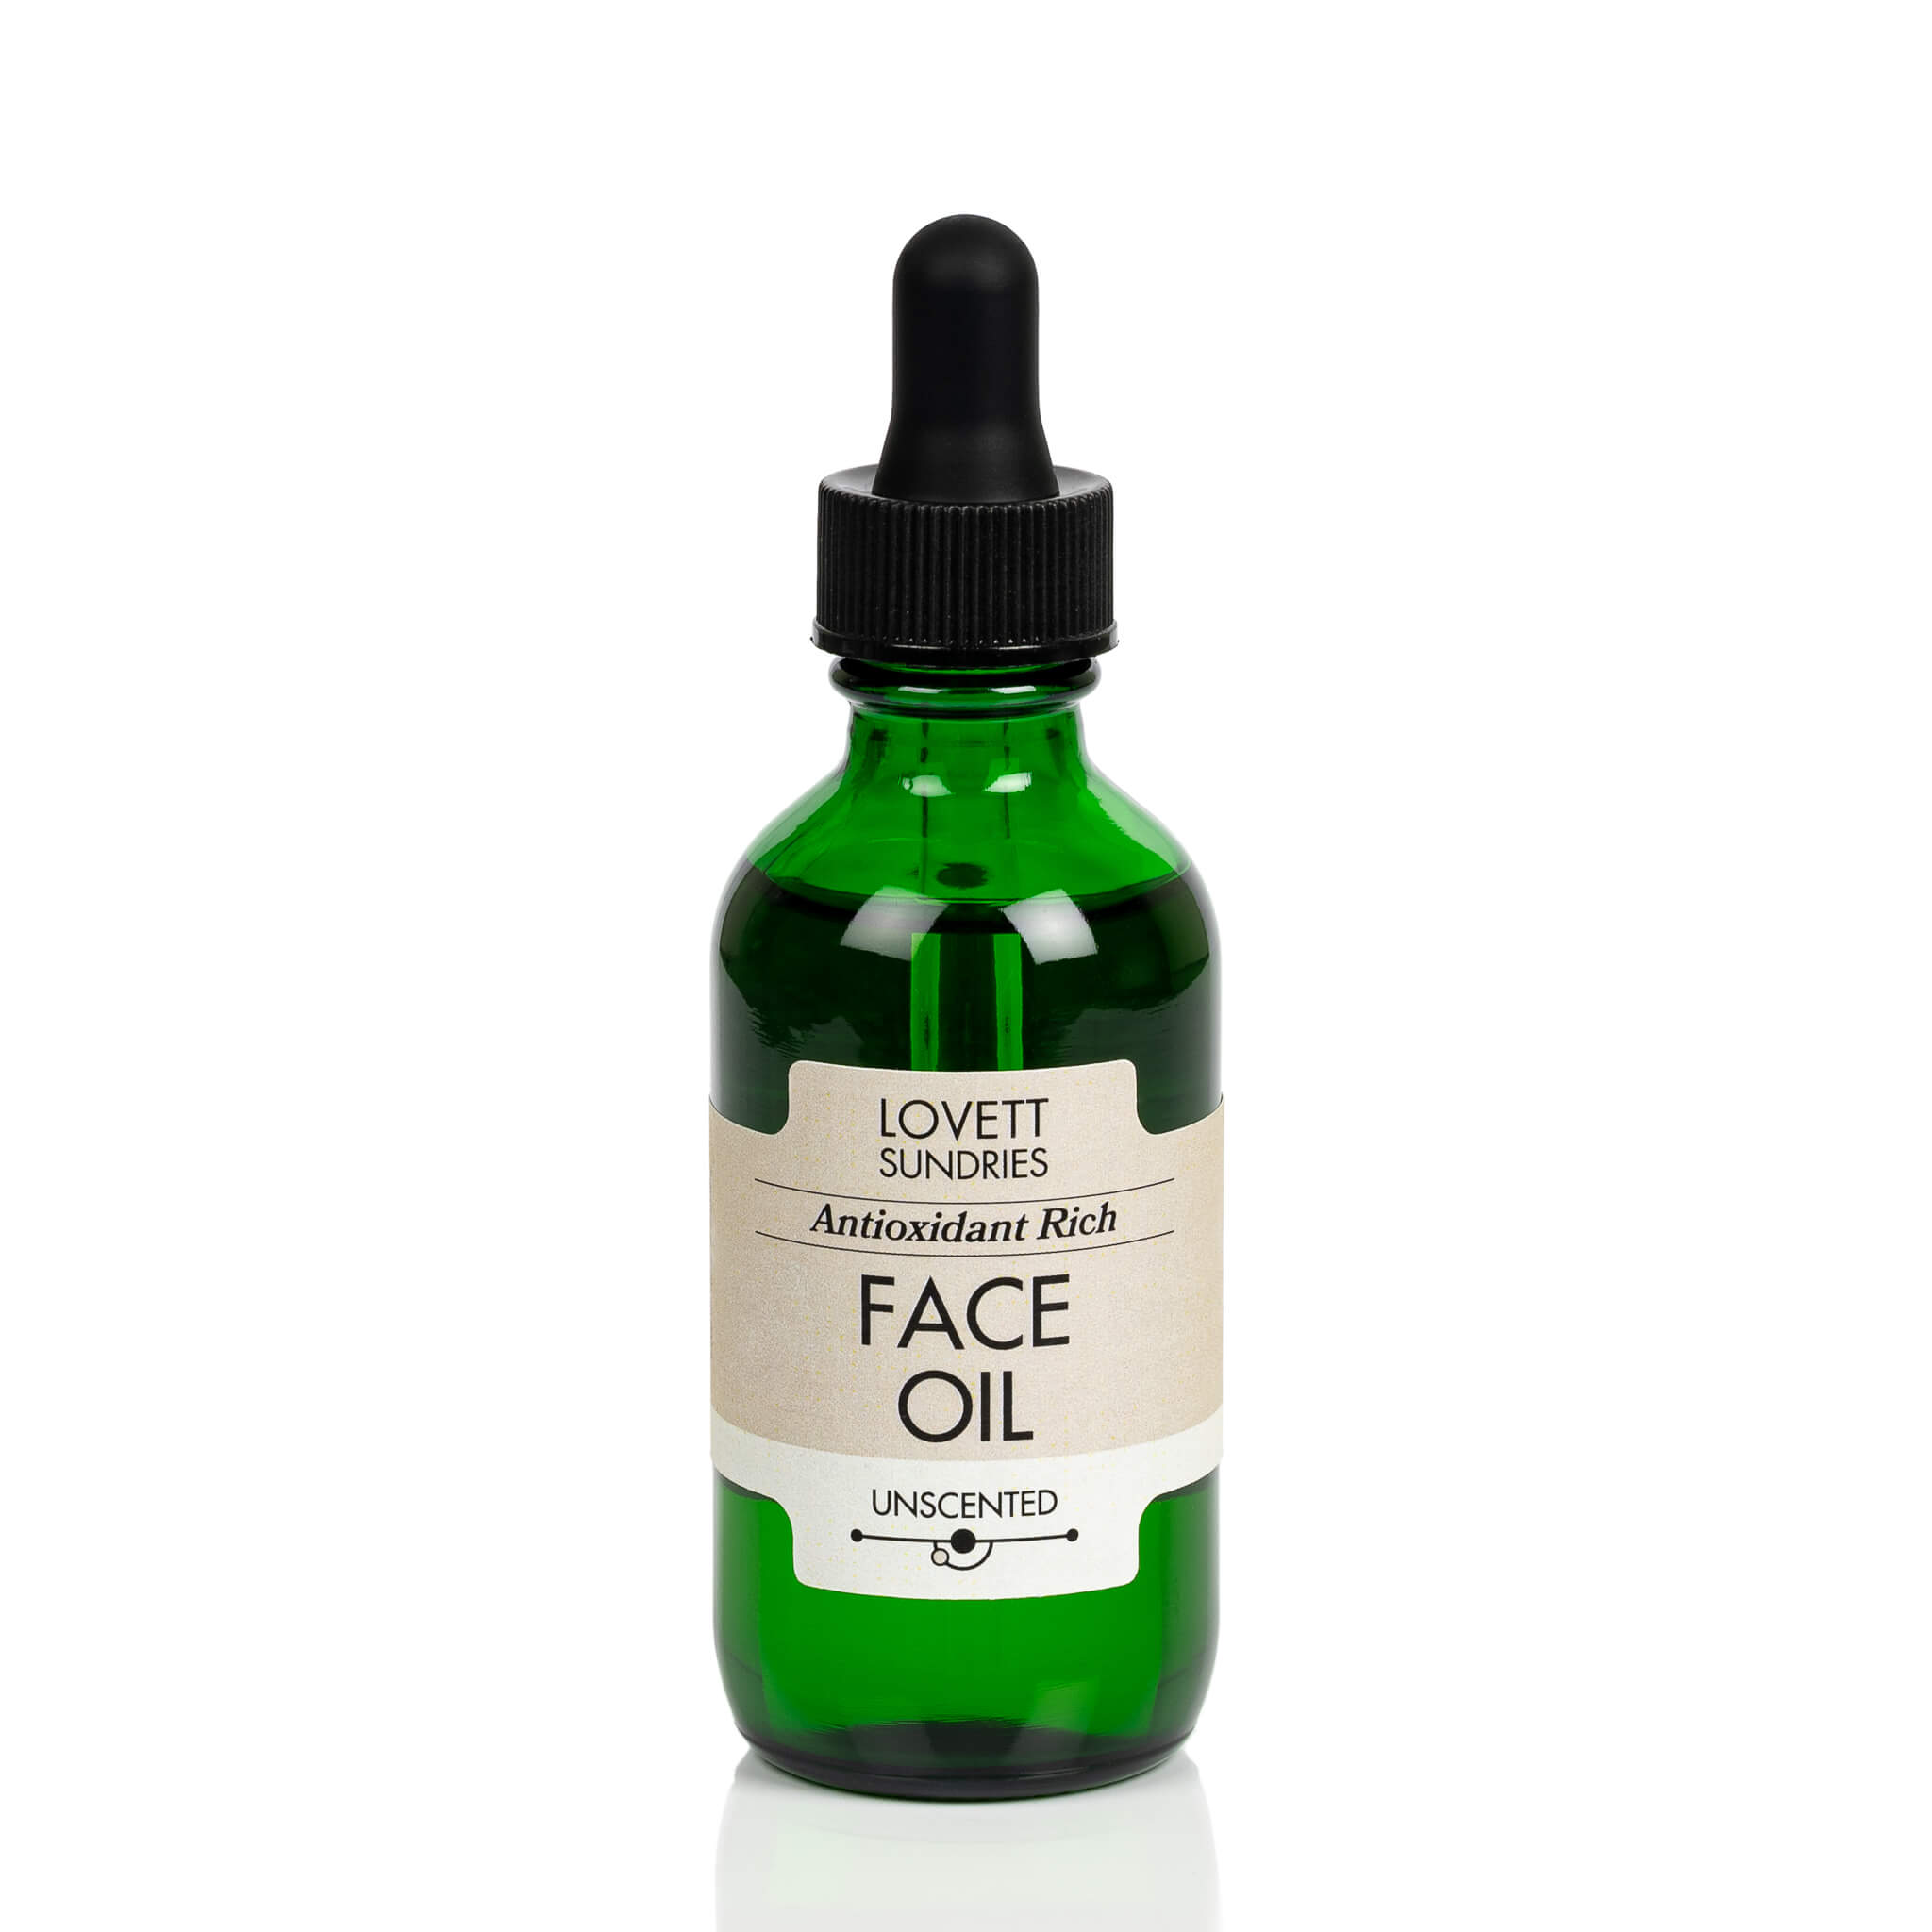 All natural antioxidant rich unscented face oil in a green glass jar with a dropper. 